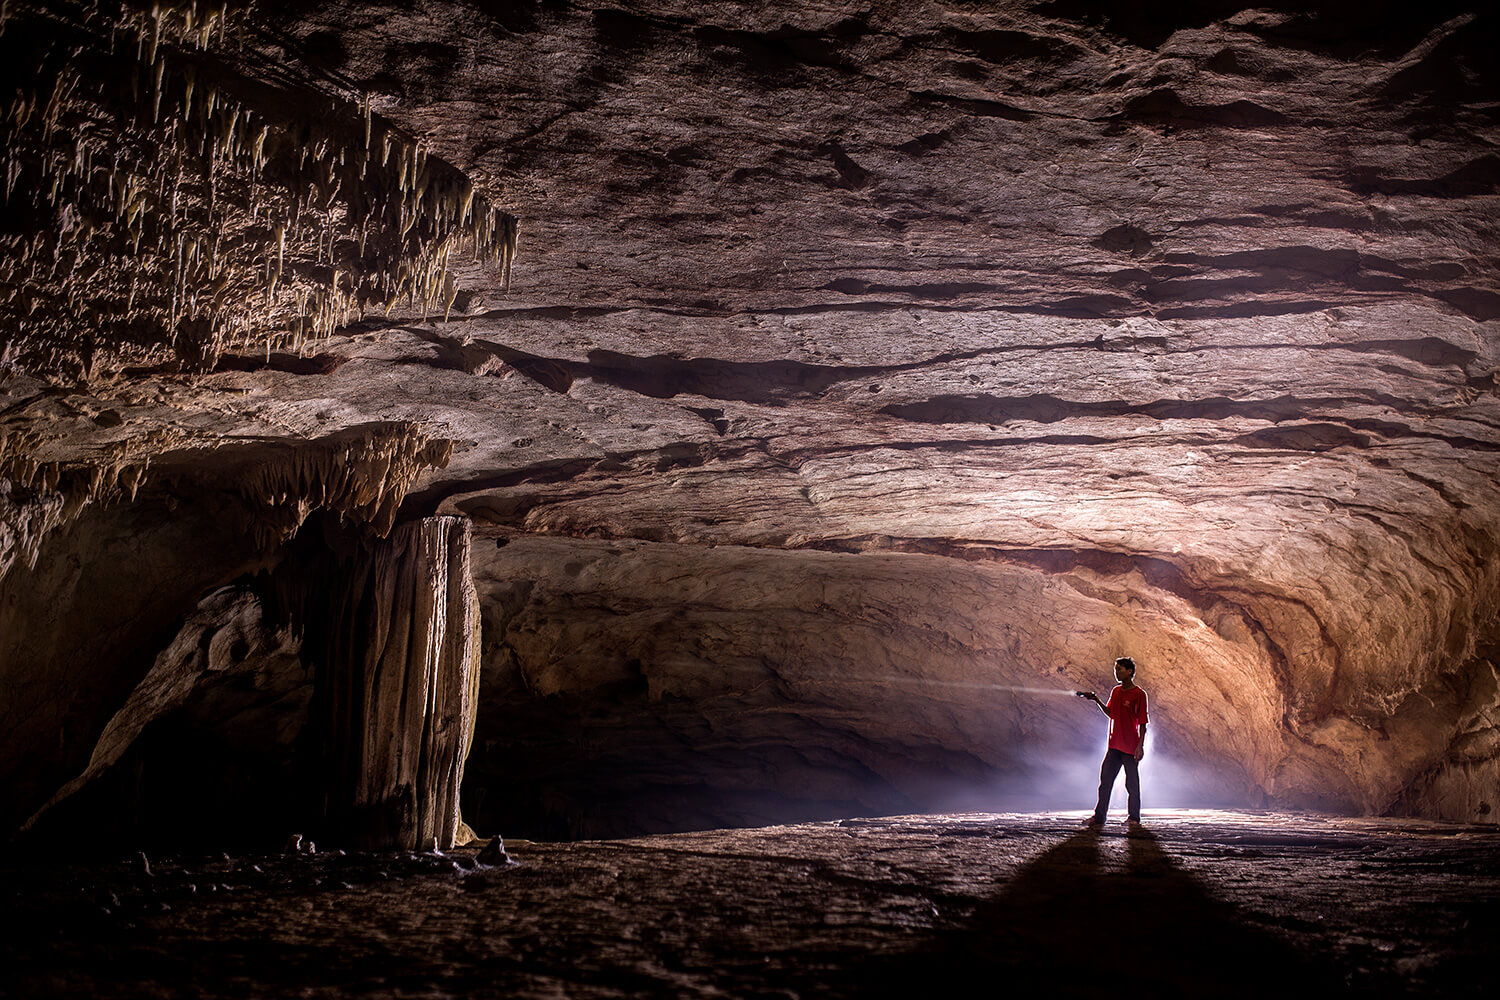 Exploring The Enchanting Caves  Karsts Of Laos From A UAE Perspective.